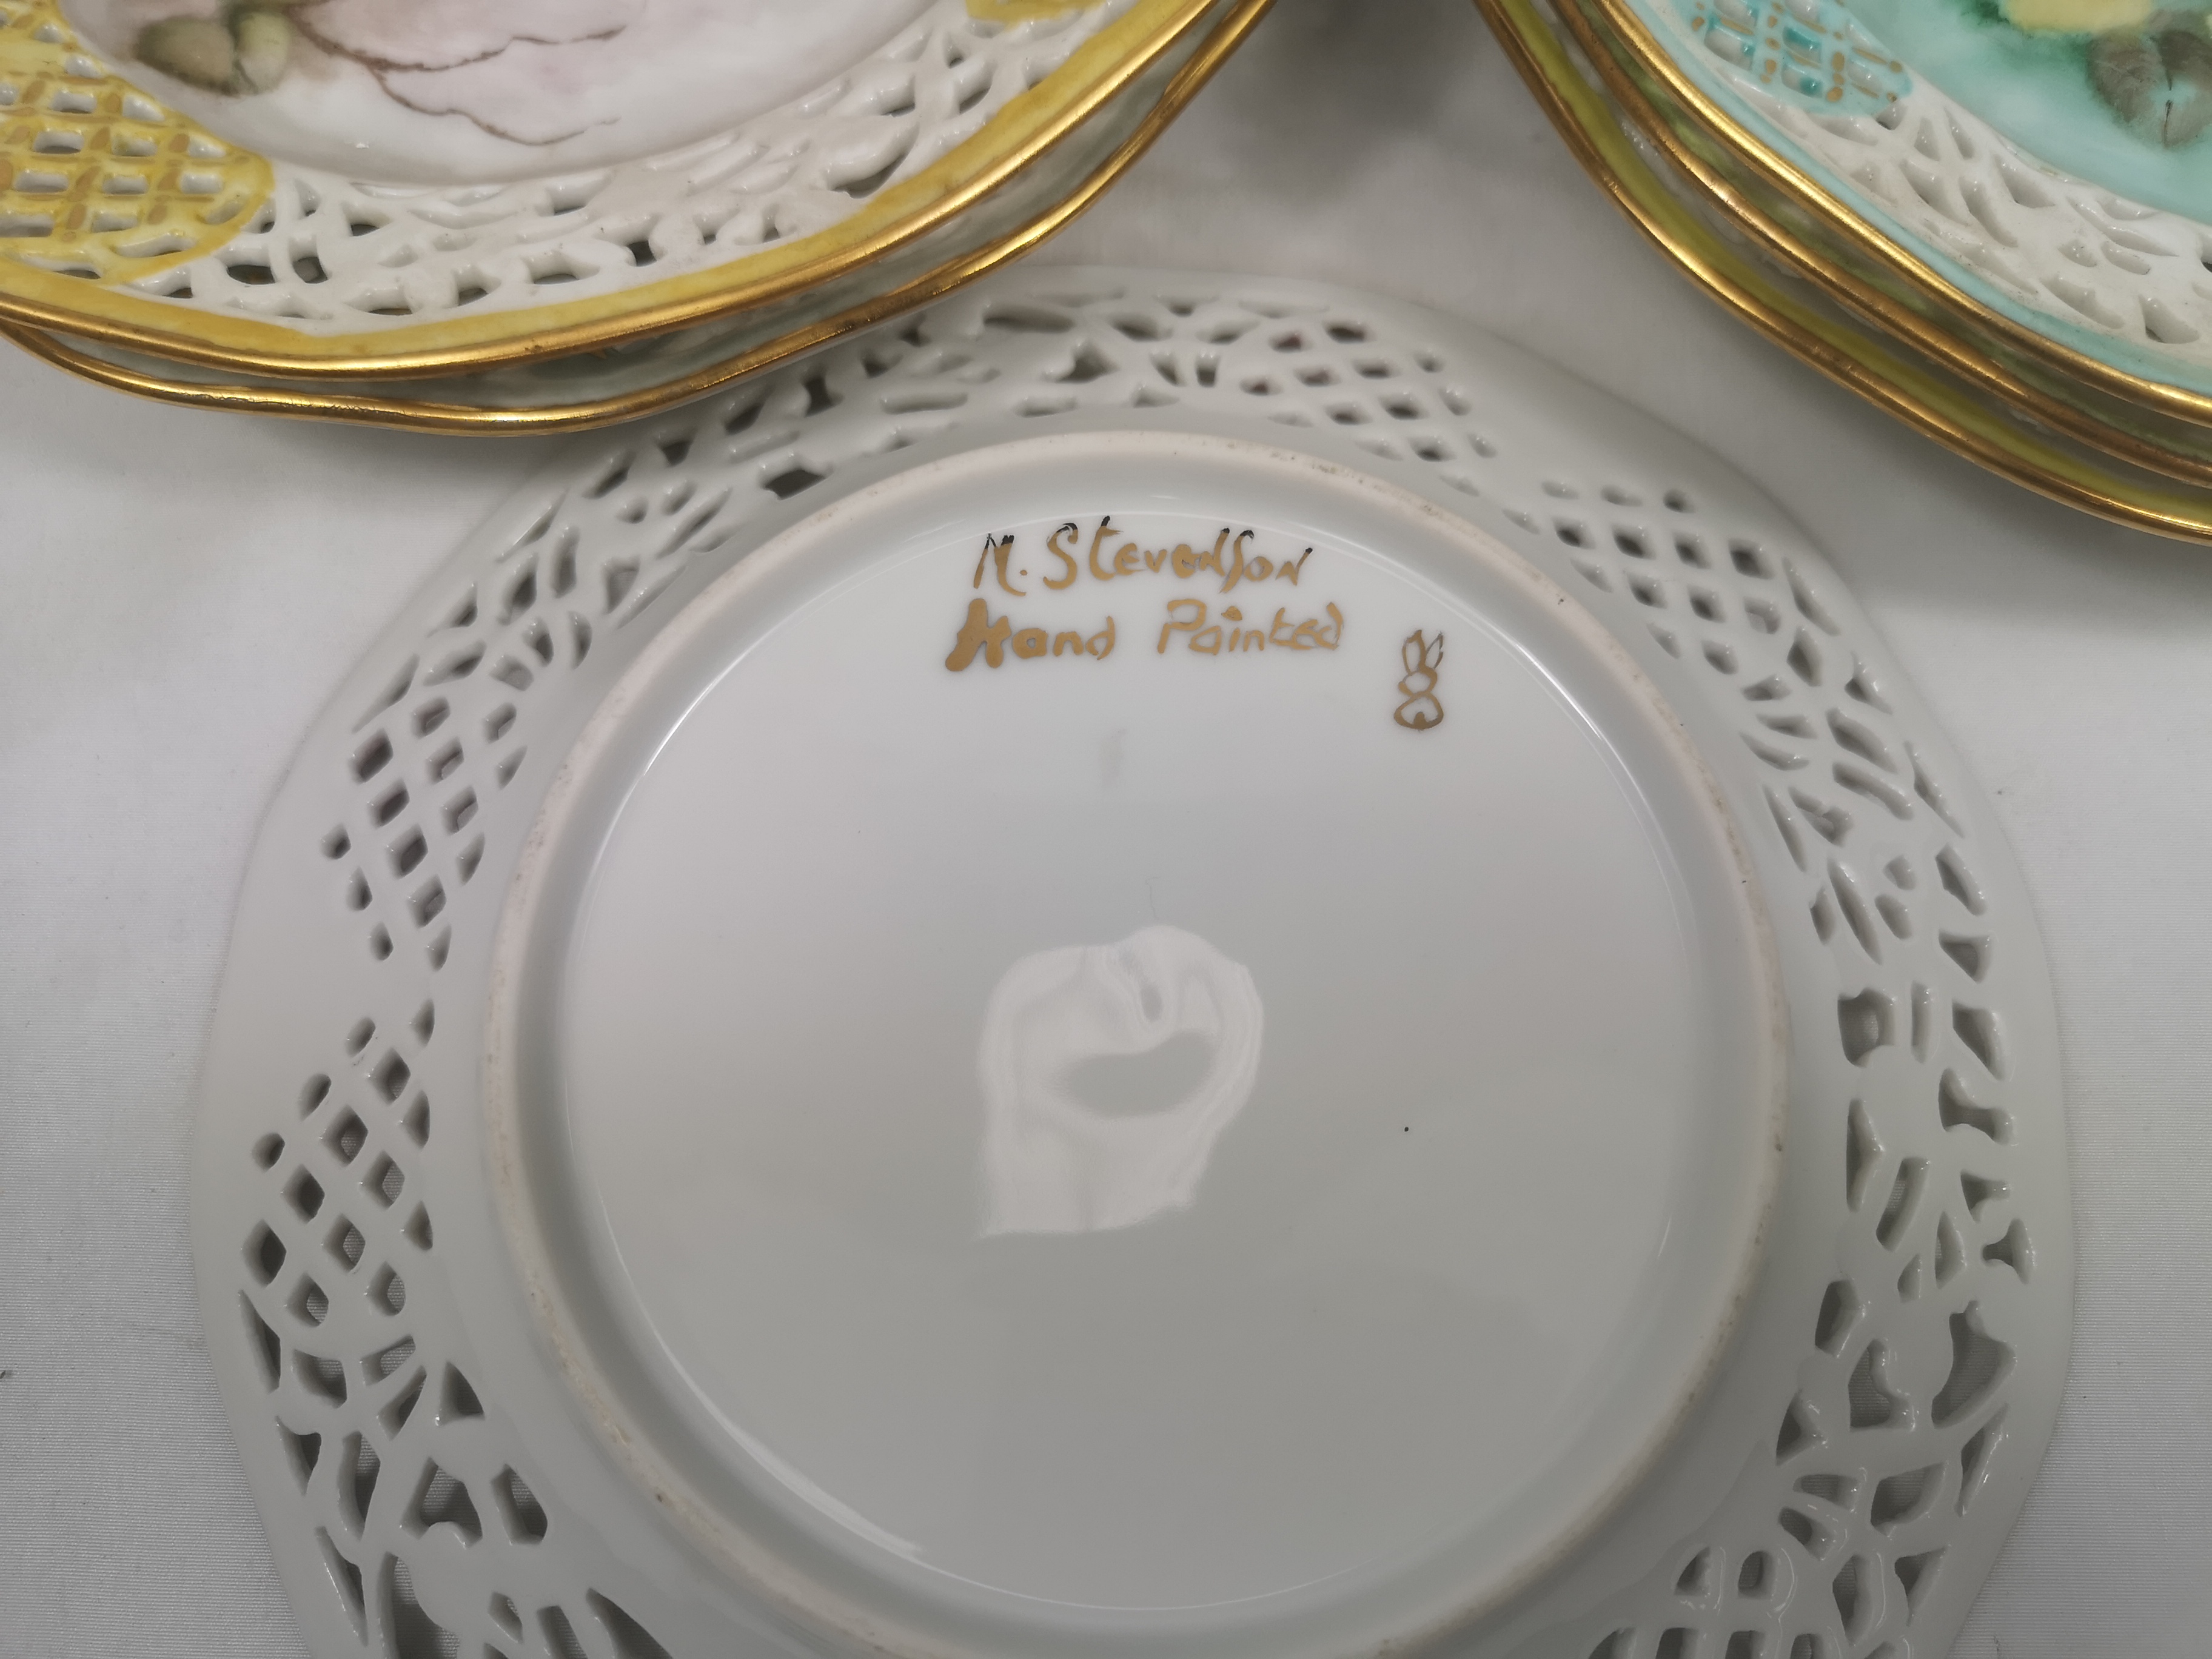 Quantity of hand painted plates and bowls by Marjorie Stevenson - Image 8 of 8